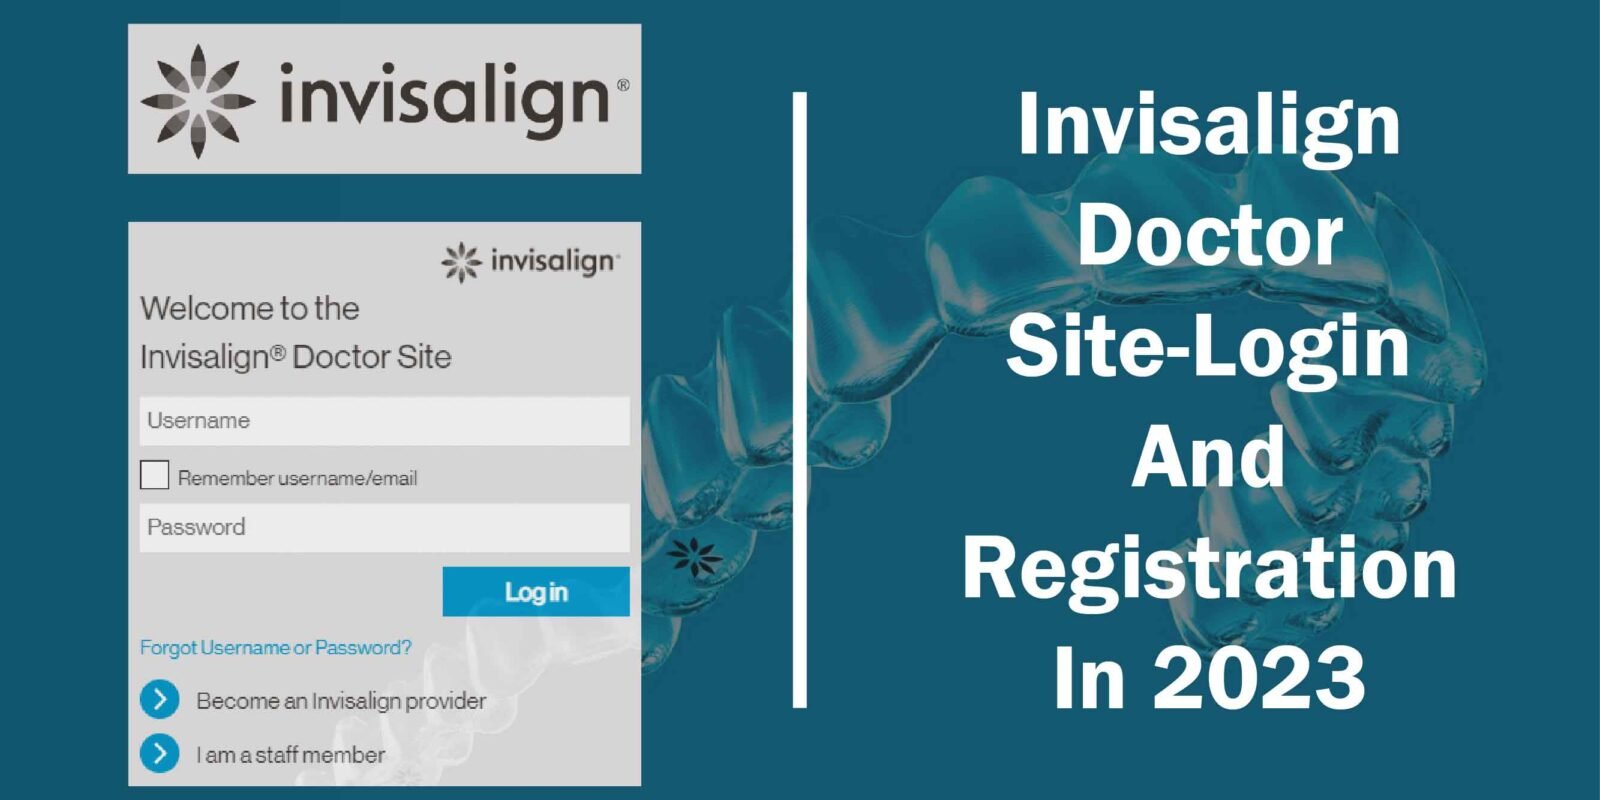 Invisalign Doctor Site Login And Registration In 2023 1600x800 